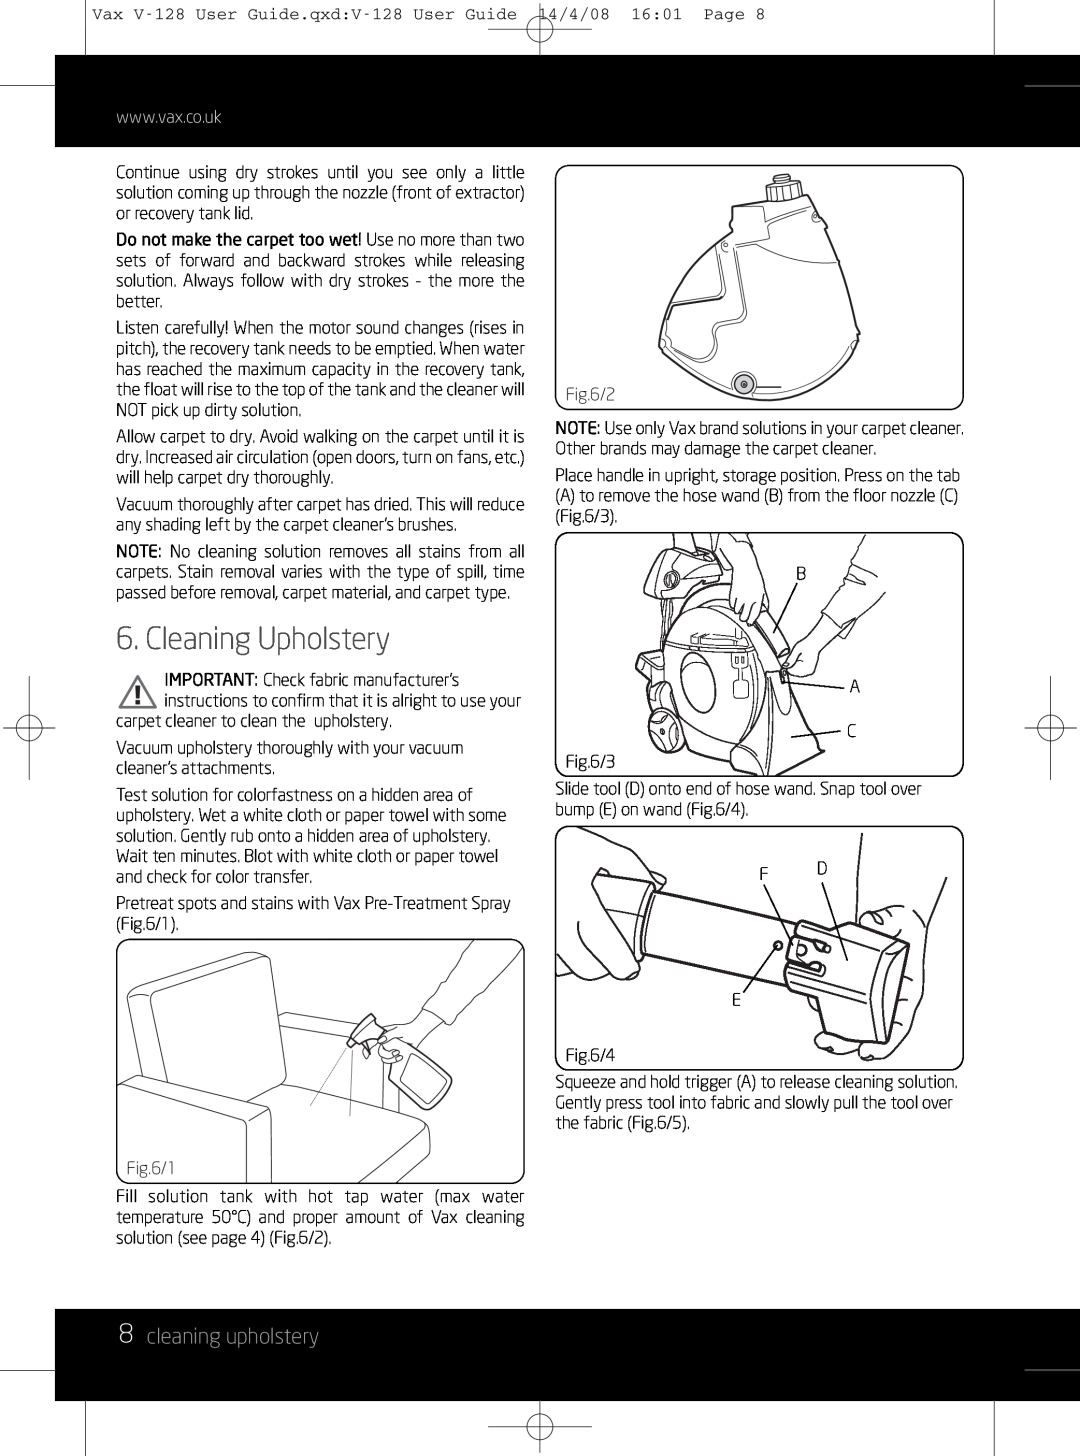 Vizio V-128 instruction manual Cleaning Upholstery, 8cleaning upholstery 